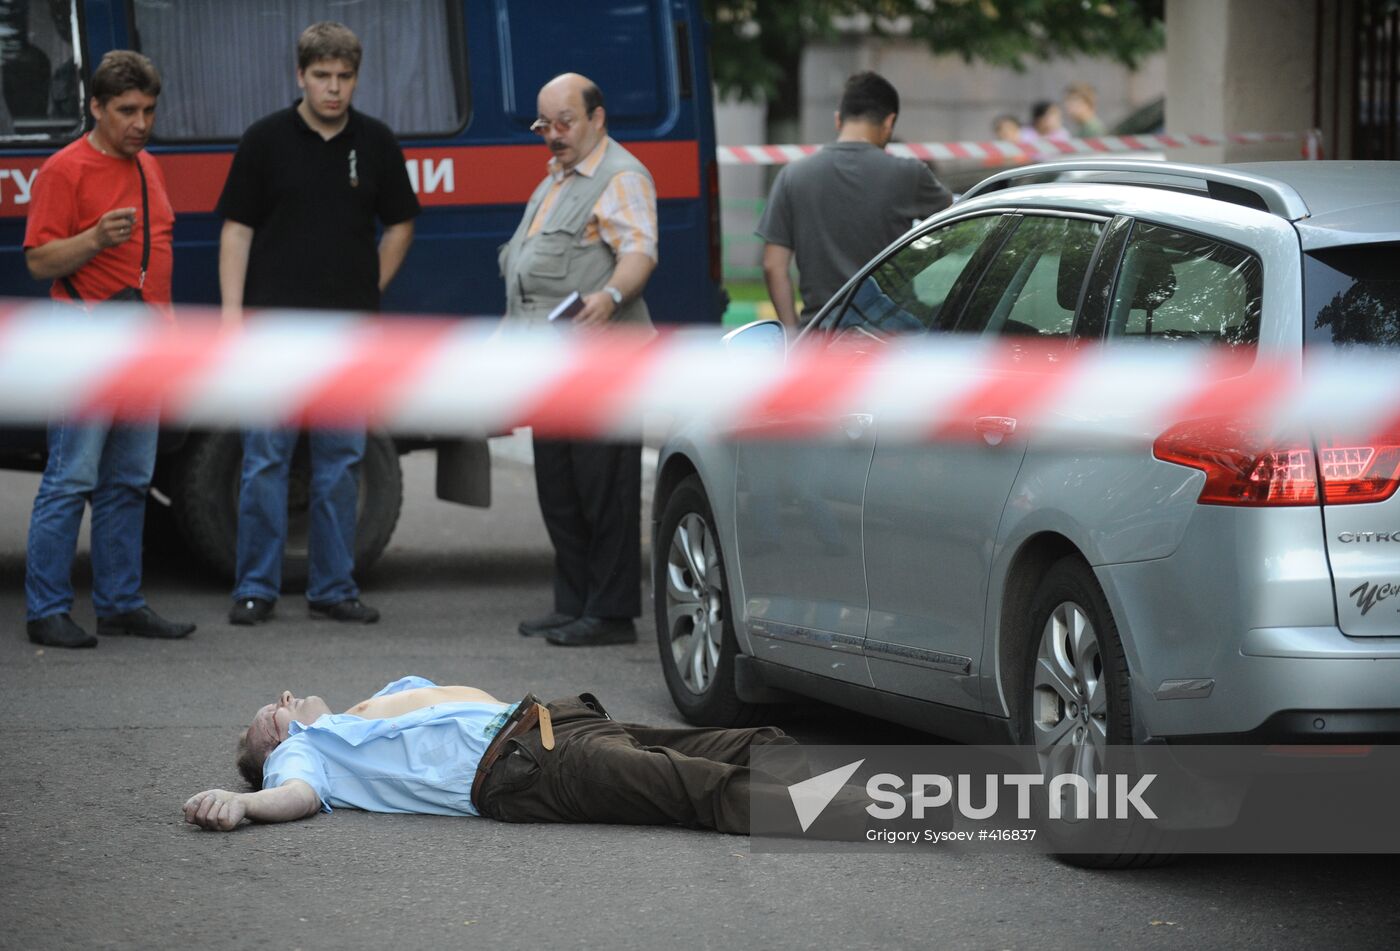 Man shot dead by unknown criminal in west Moscow